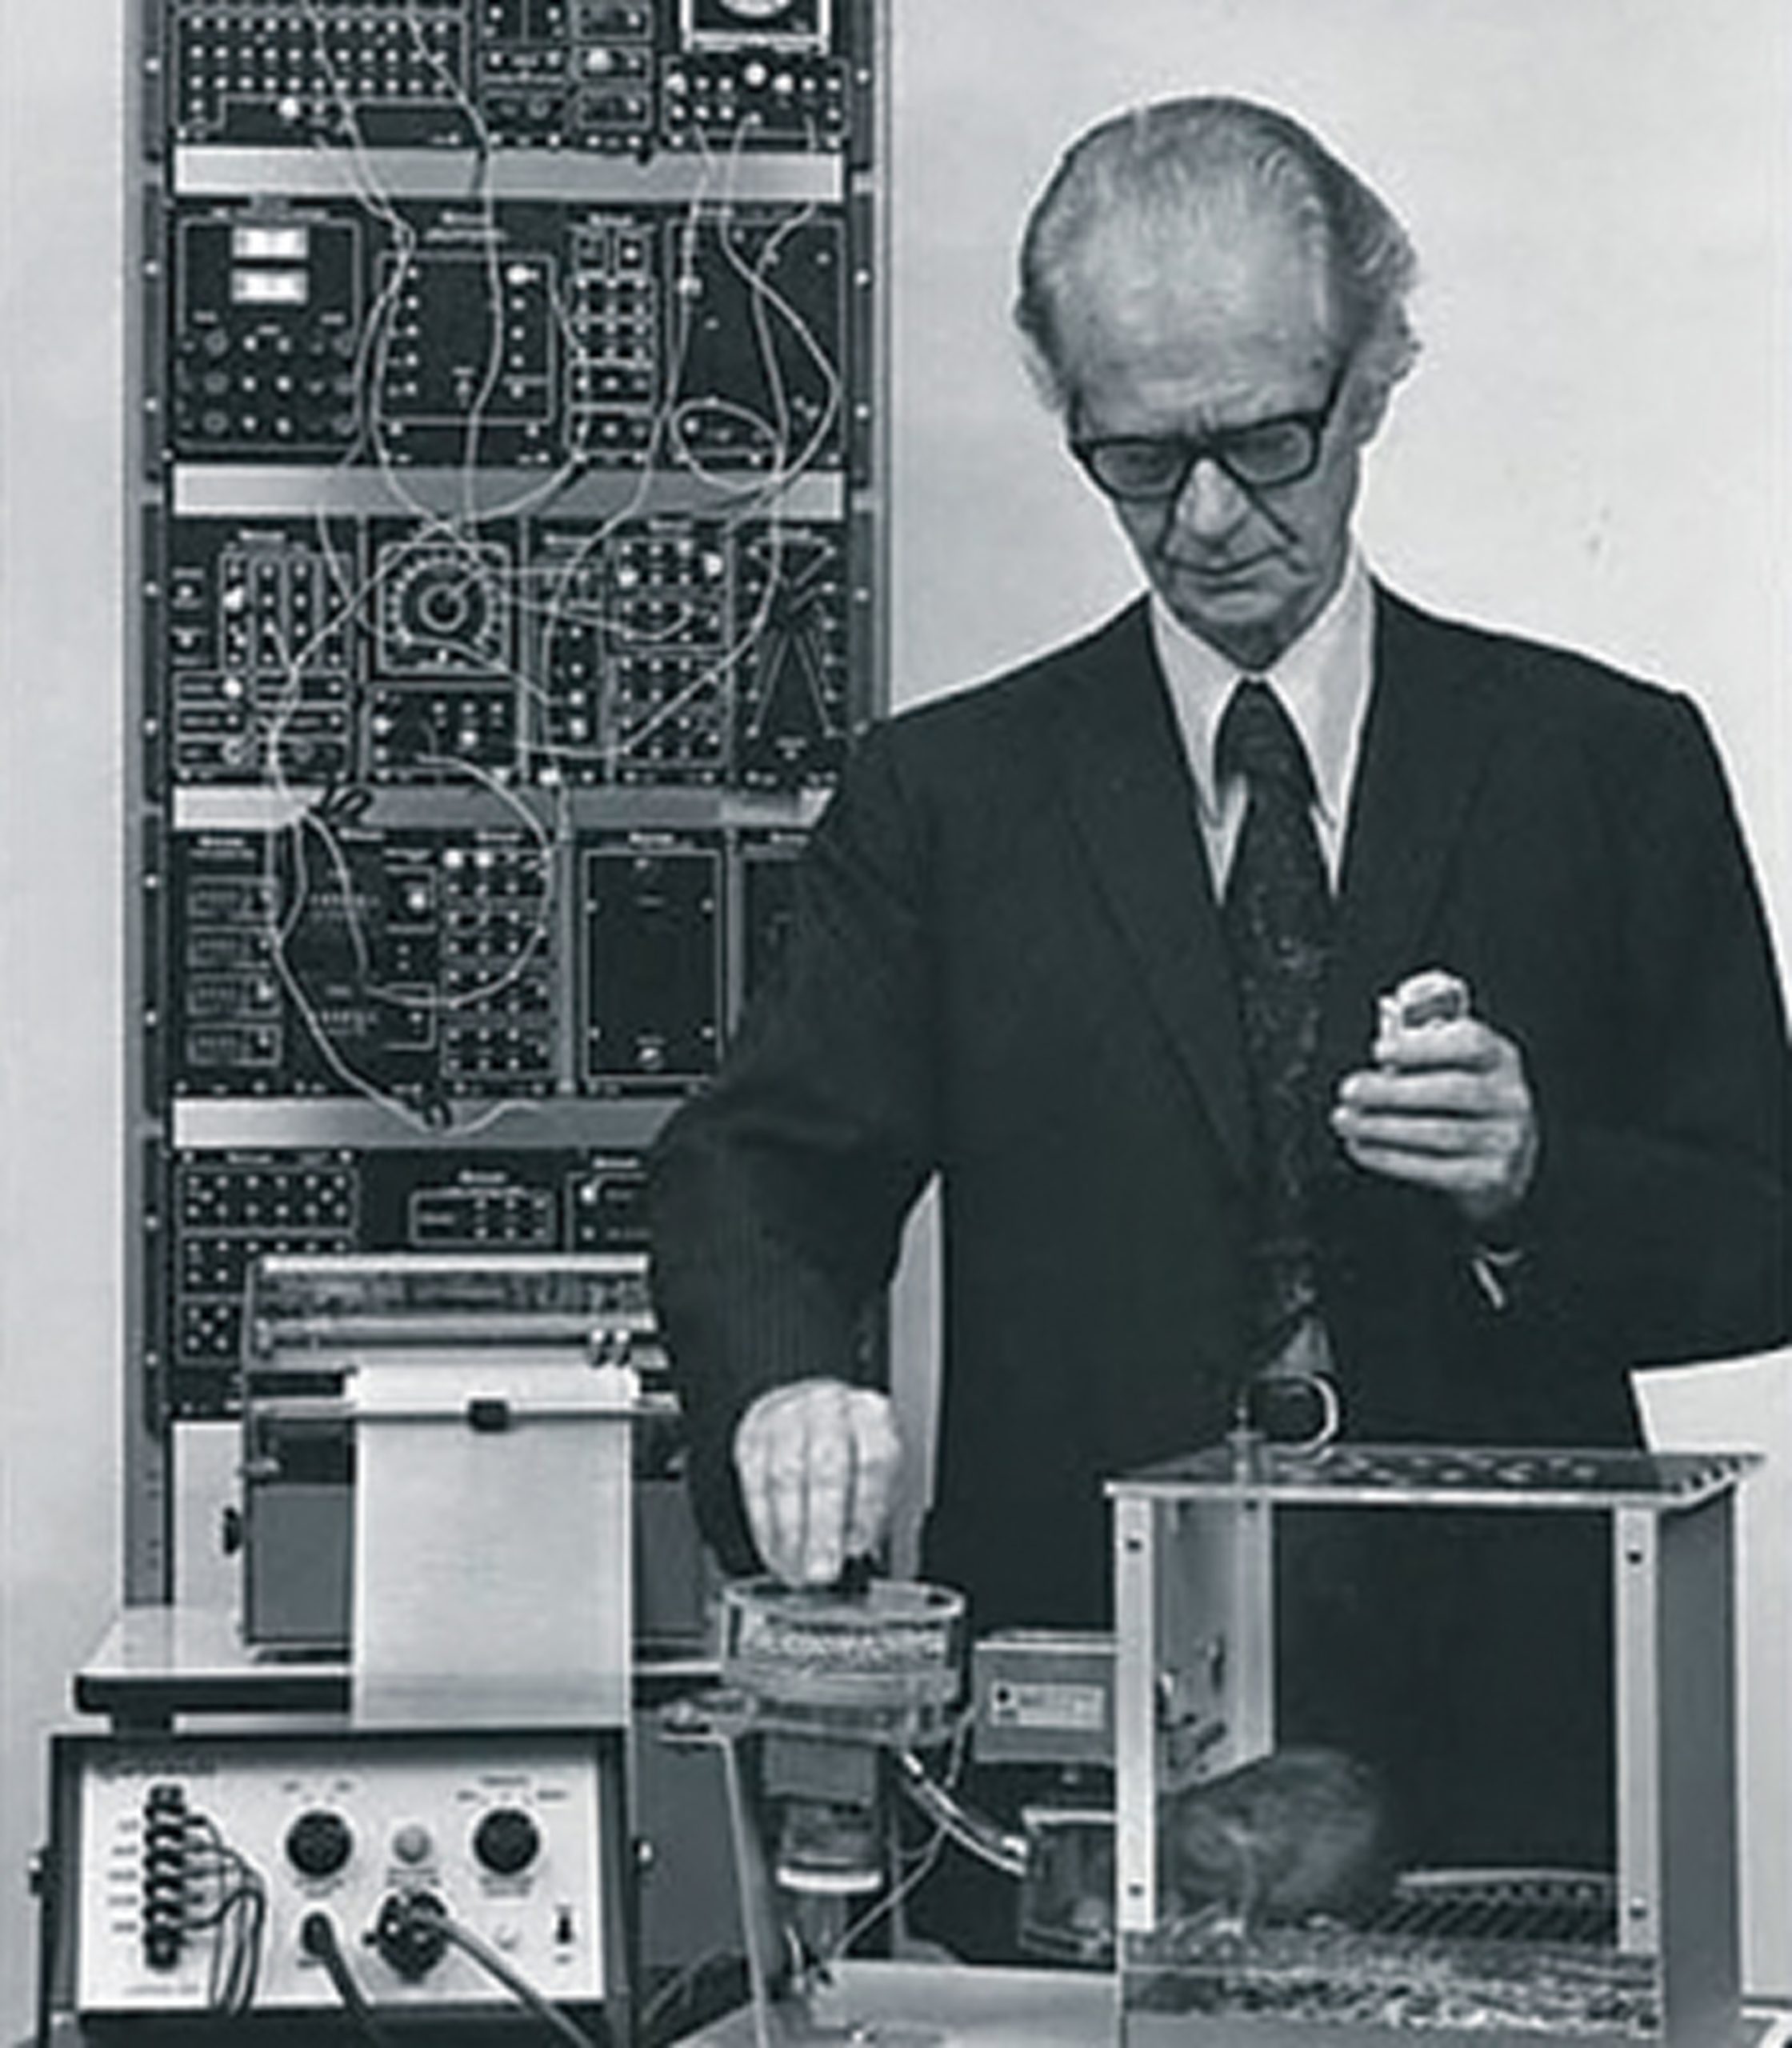 Burrhus Skinner, photographed in his Harvard laboratory with a rat, operant chamber and control equipment at the rear.